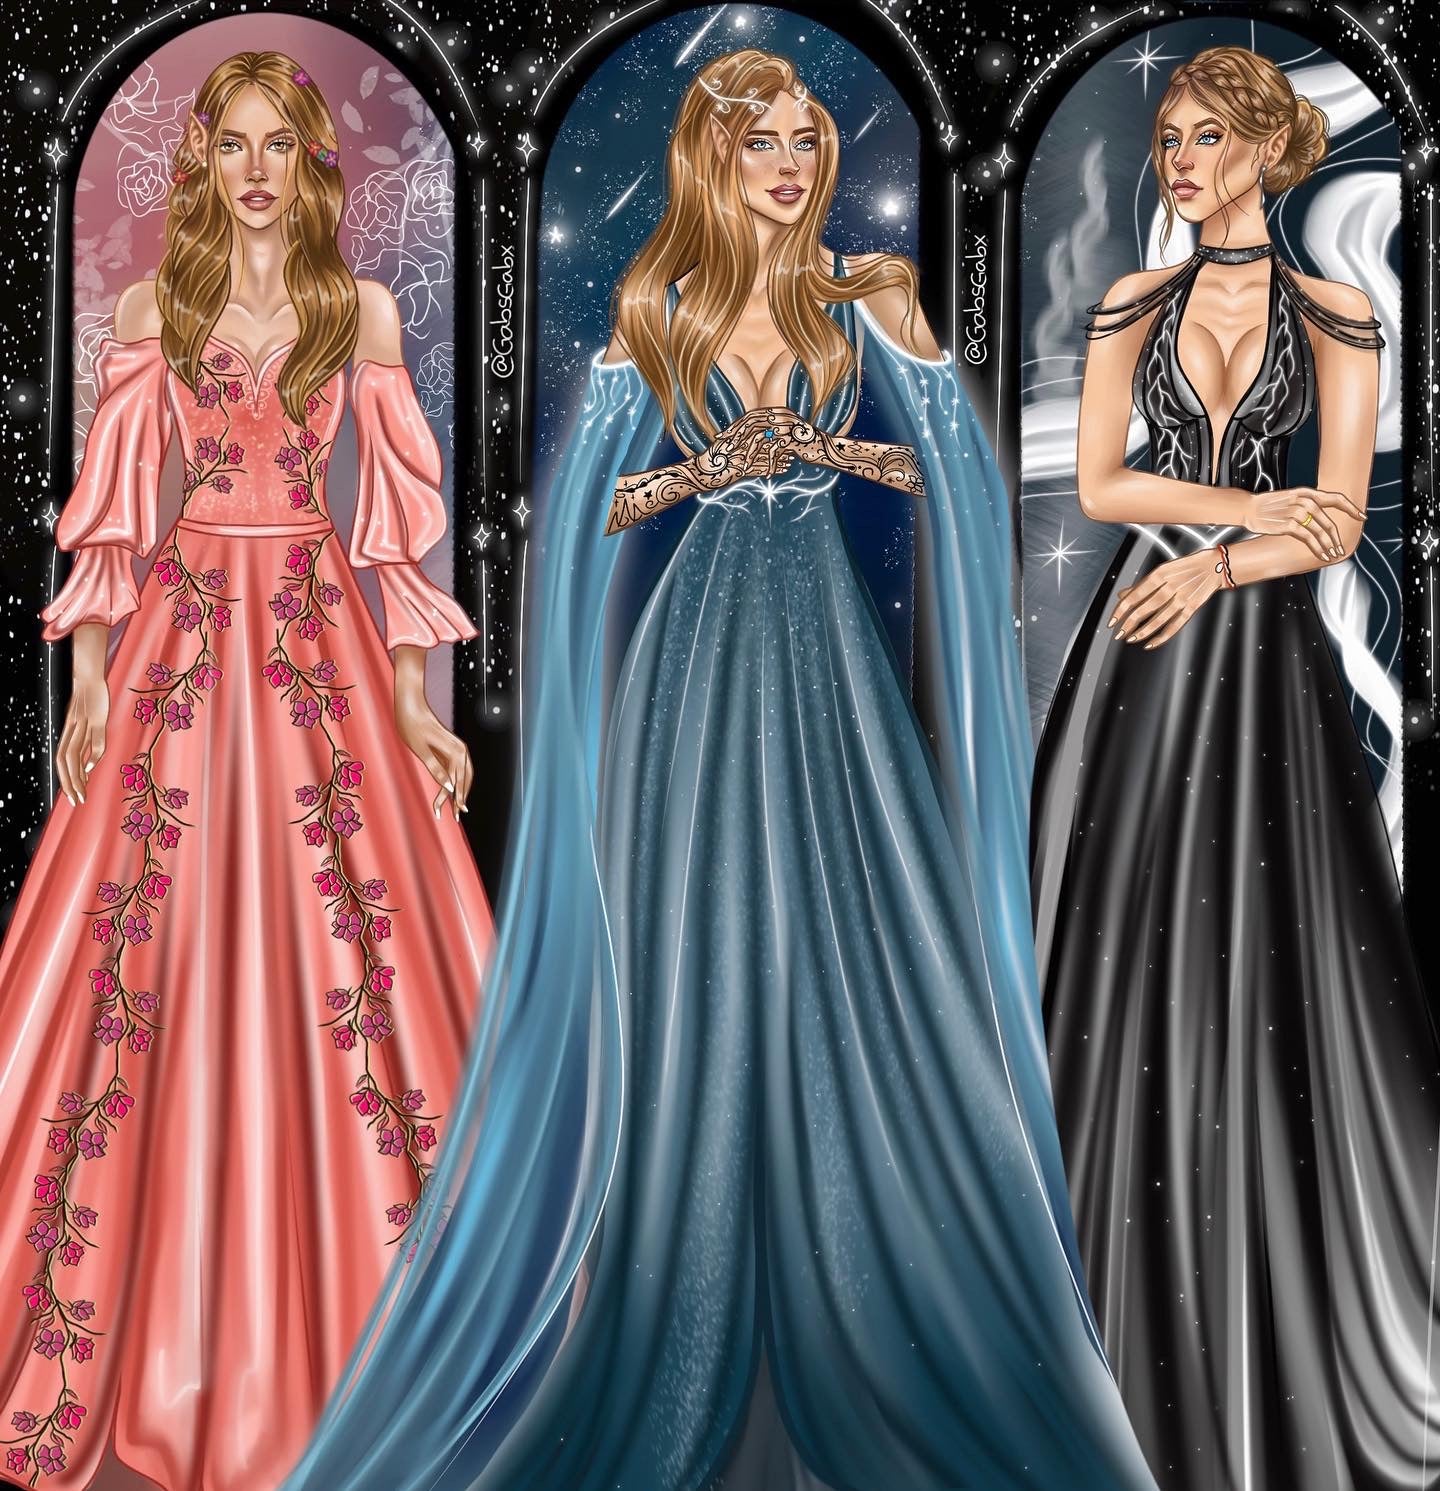 Nesta, Feyre, & Elain - Fan Art by @GabsGabx - A Court of Thorns and Roses Series - Stickable Acrylic Poster - Officially licensed by Sarah J. Maas - FA46